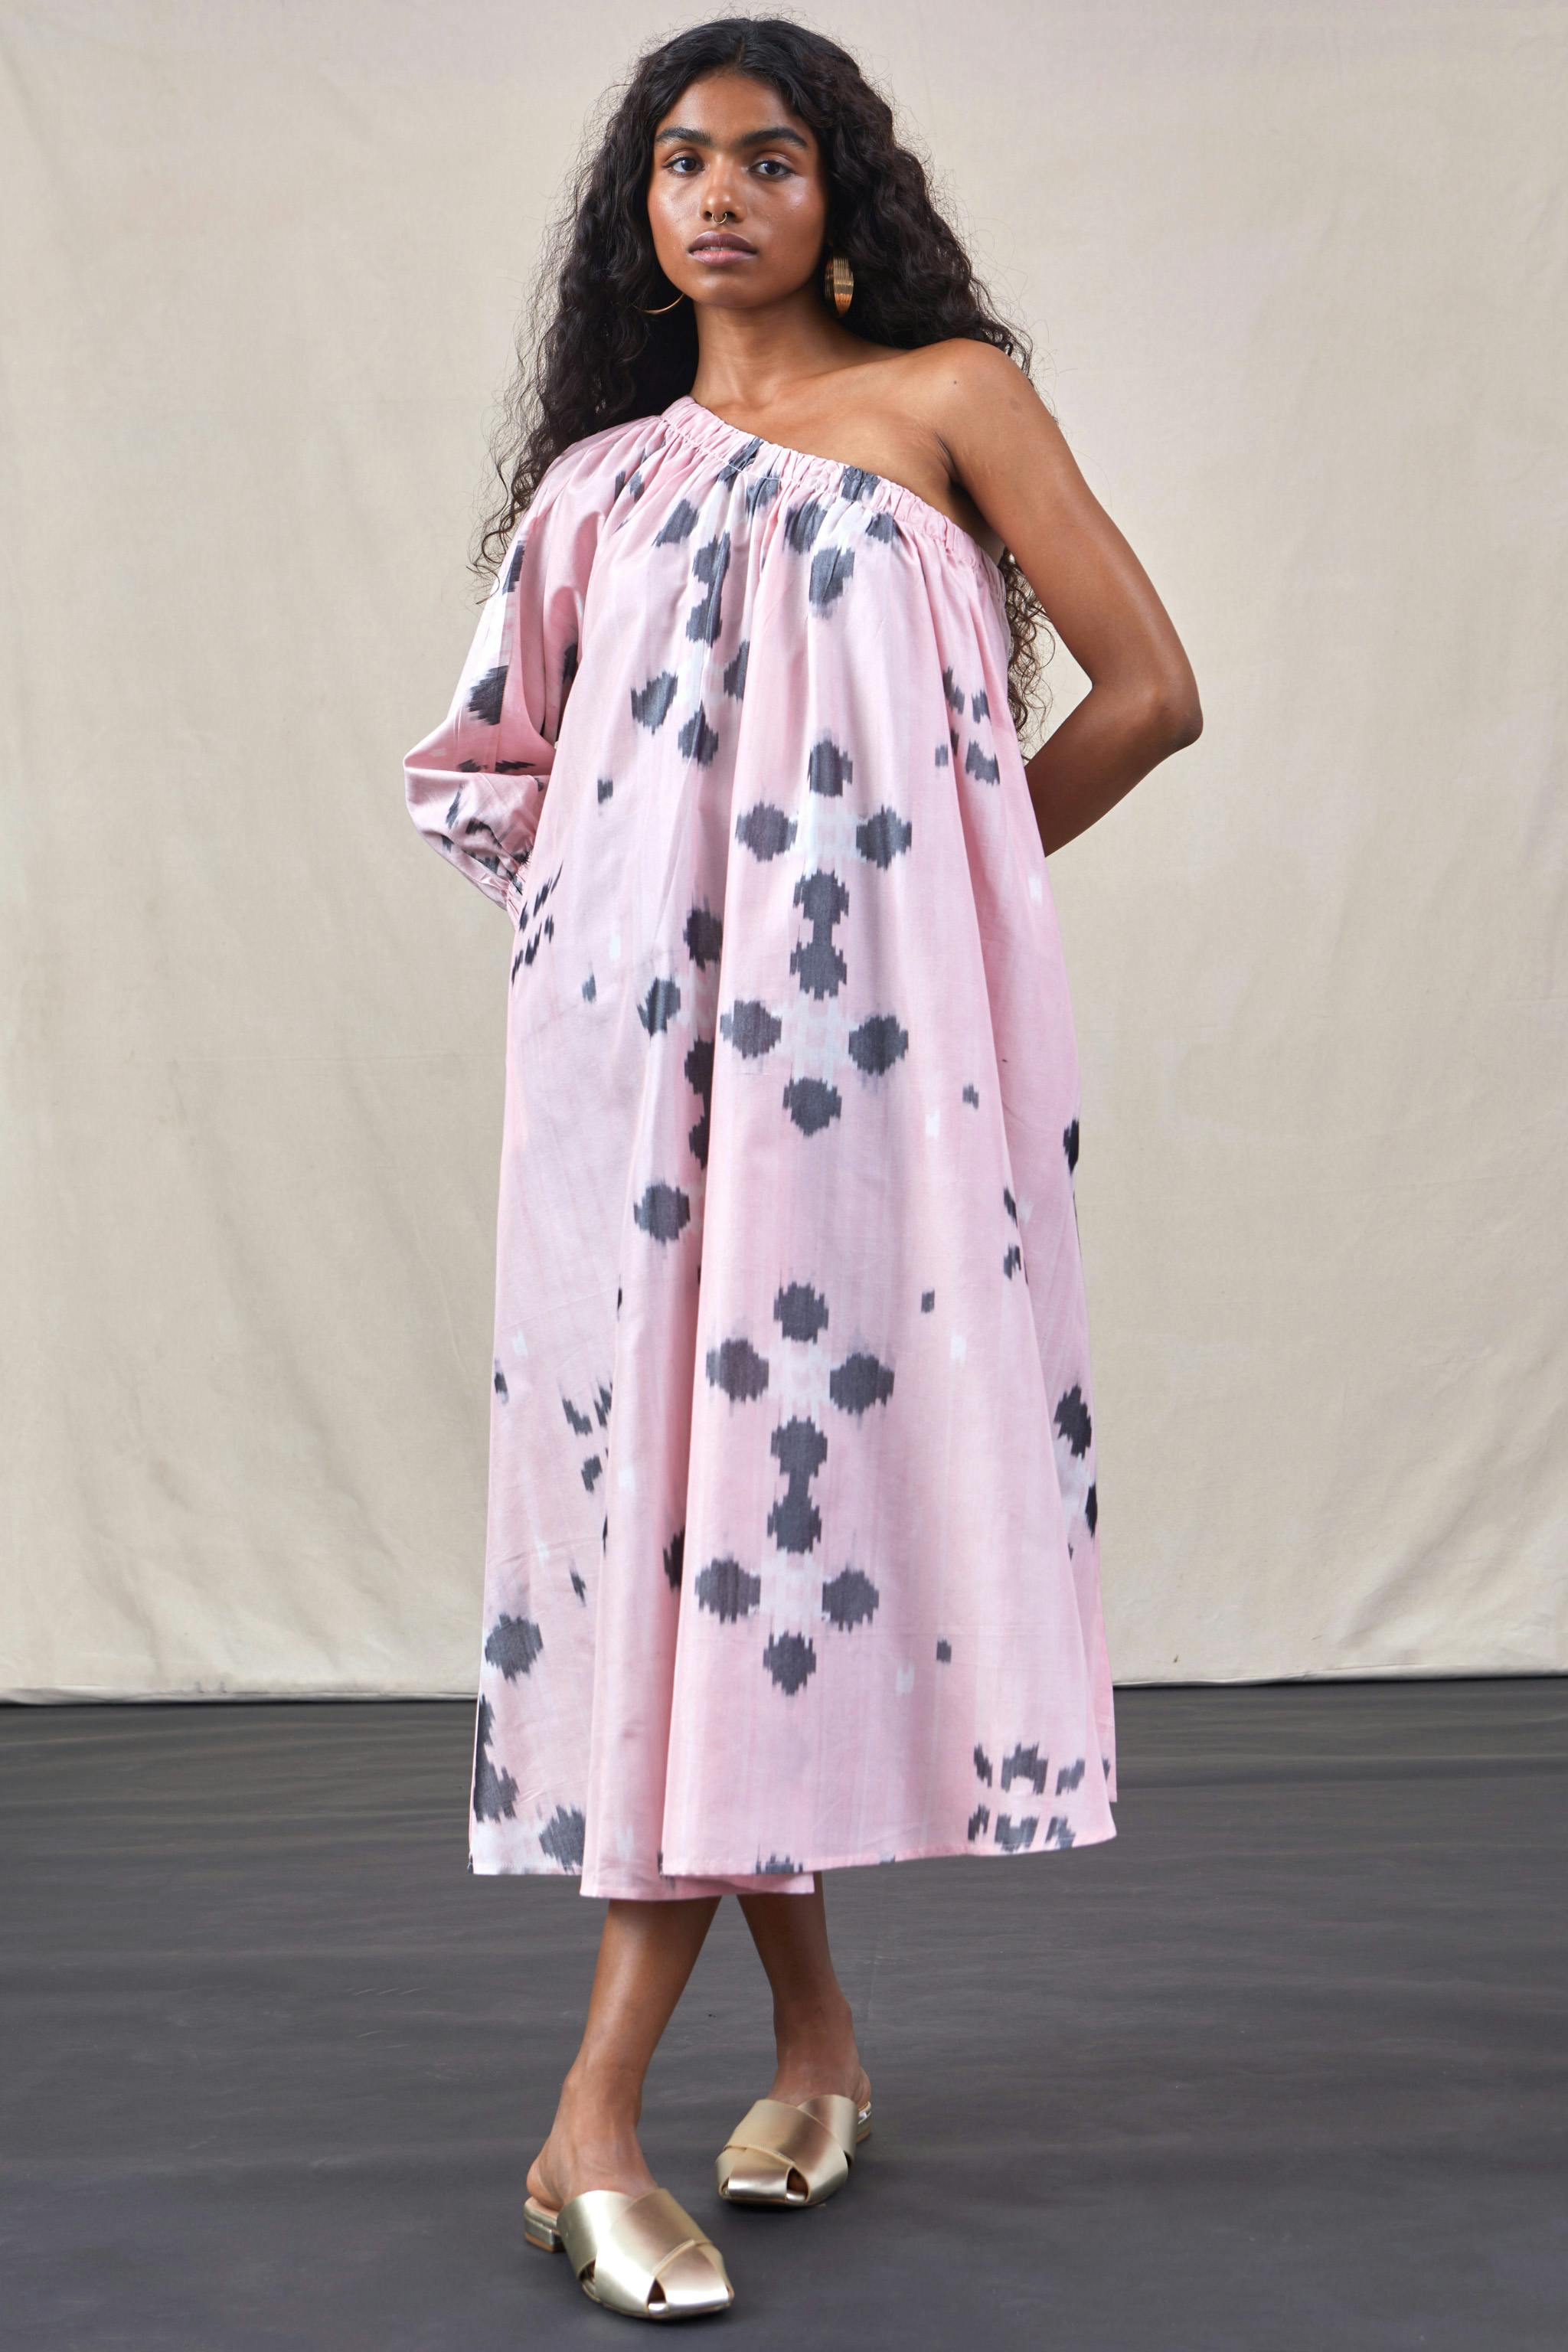 Punai - Ikat Dress Pink, a product by The Summer House